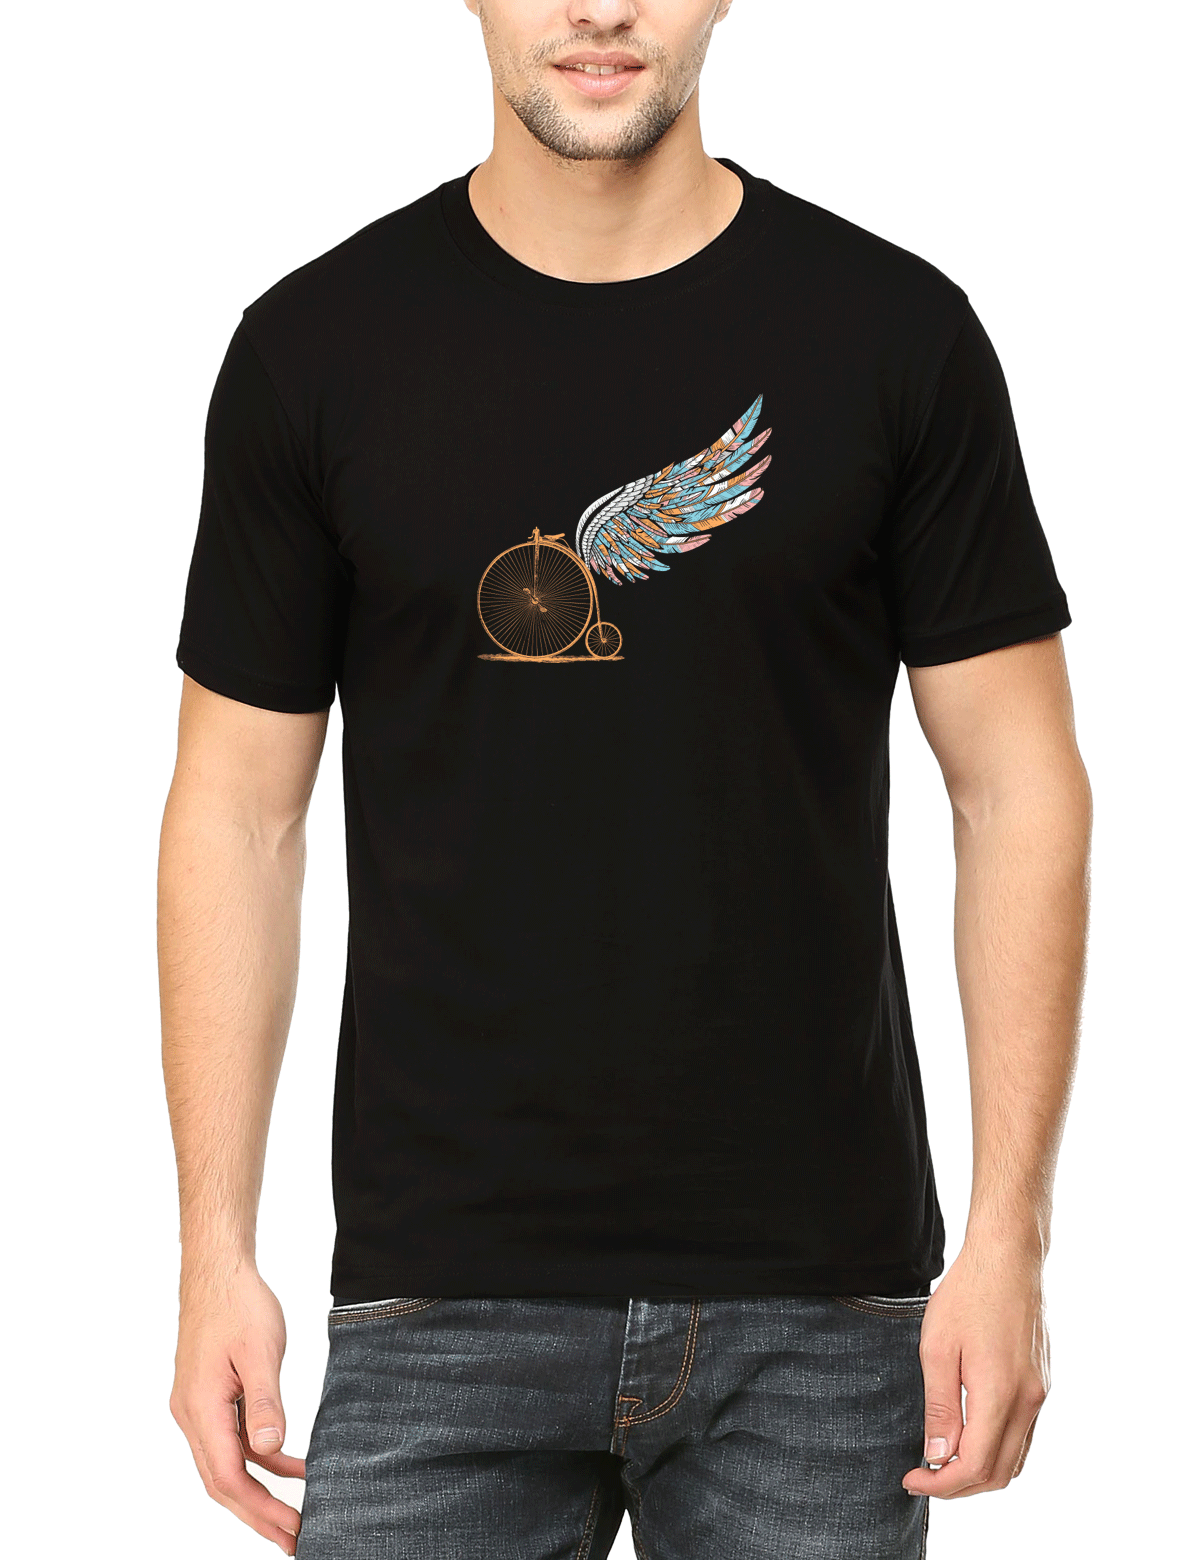 Cyclop Wheels That Fly Cycling T-Shirt - Cyclop.in